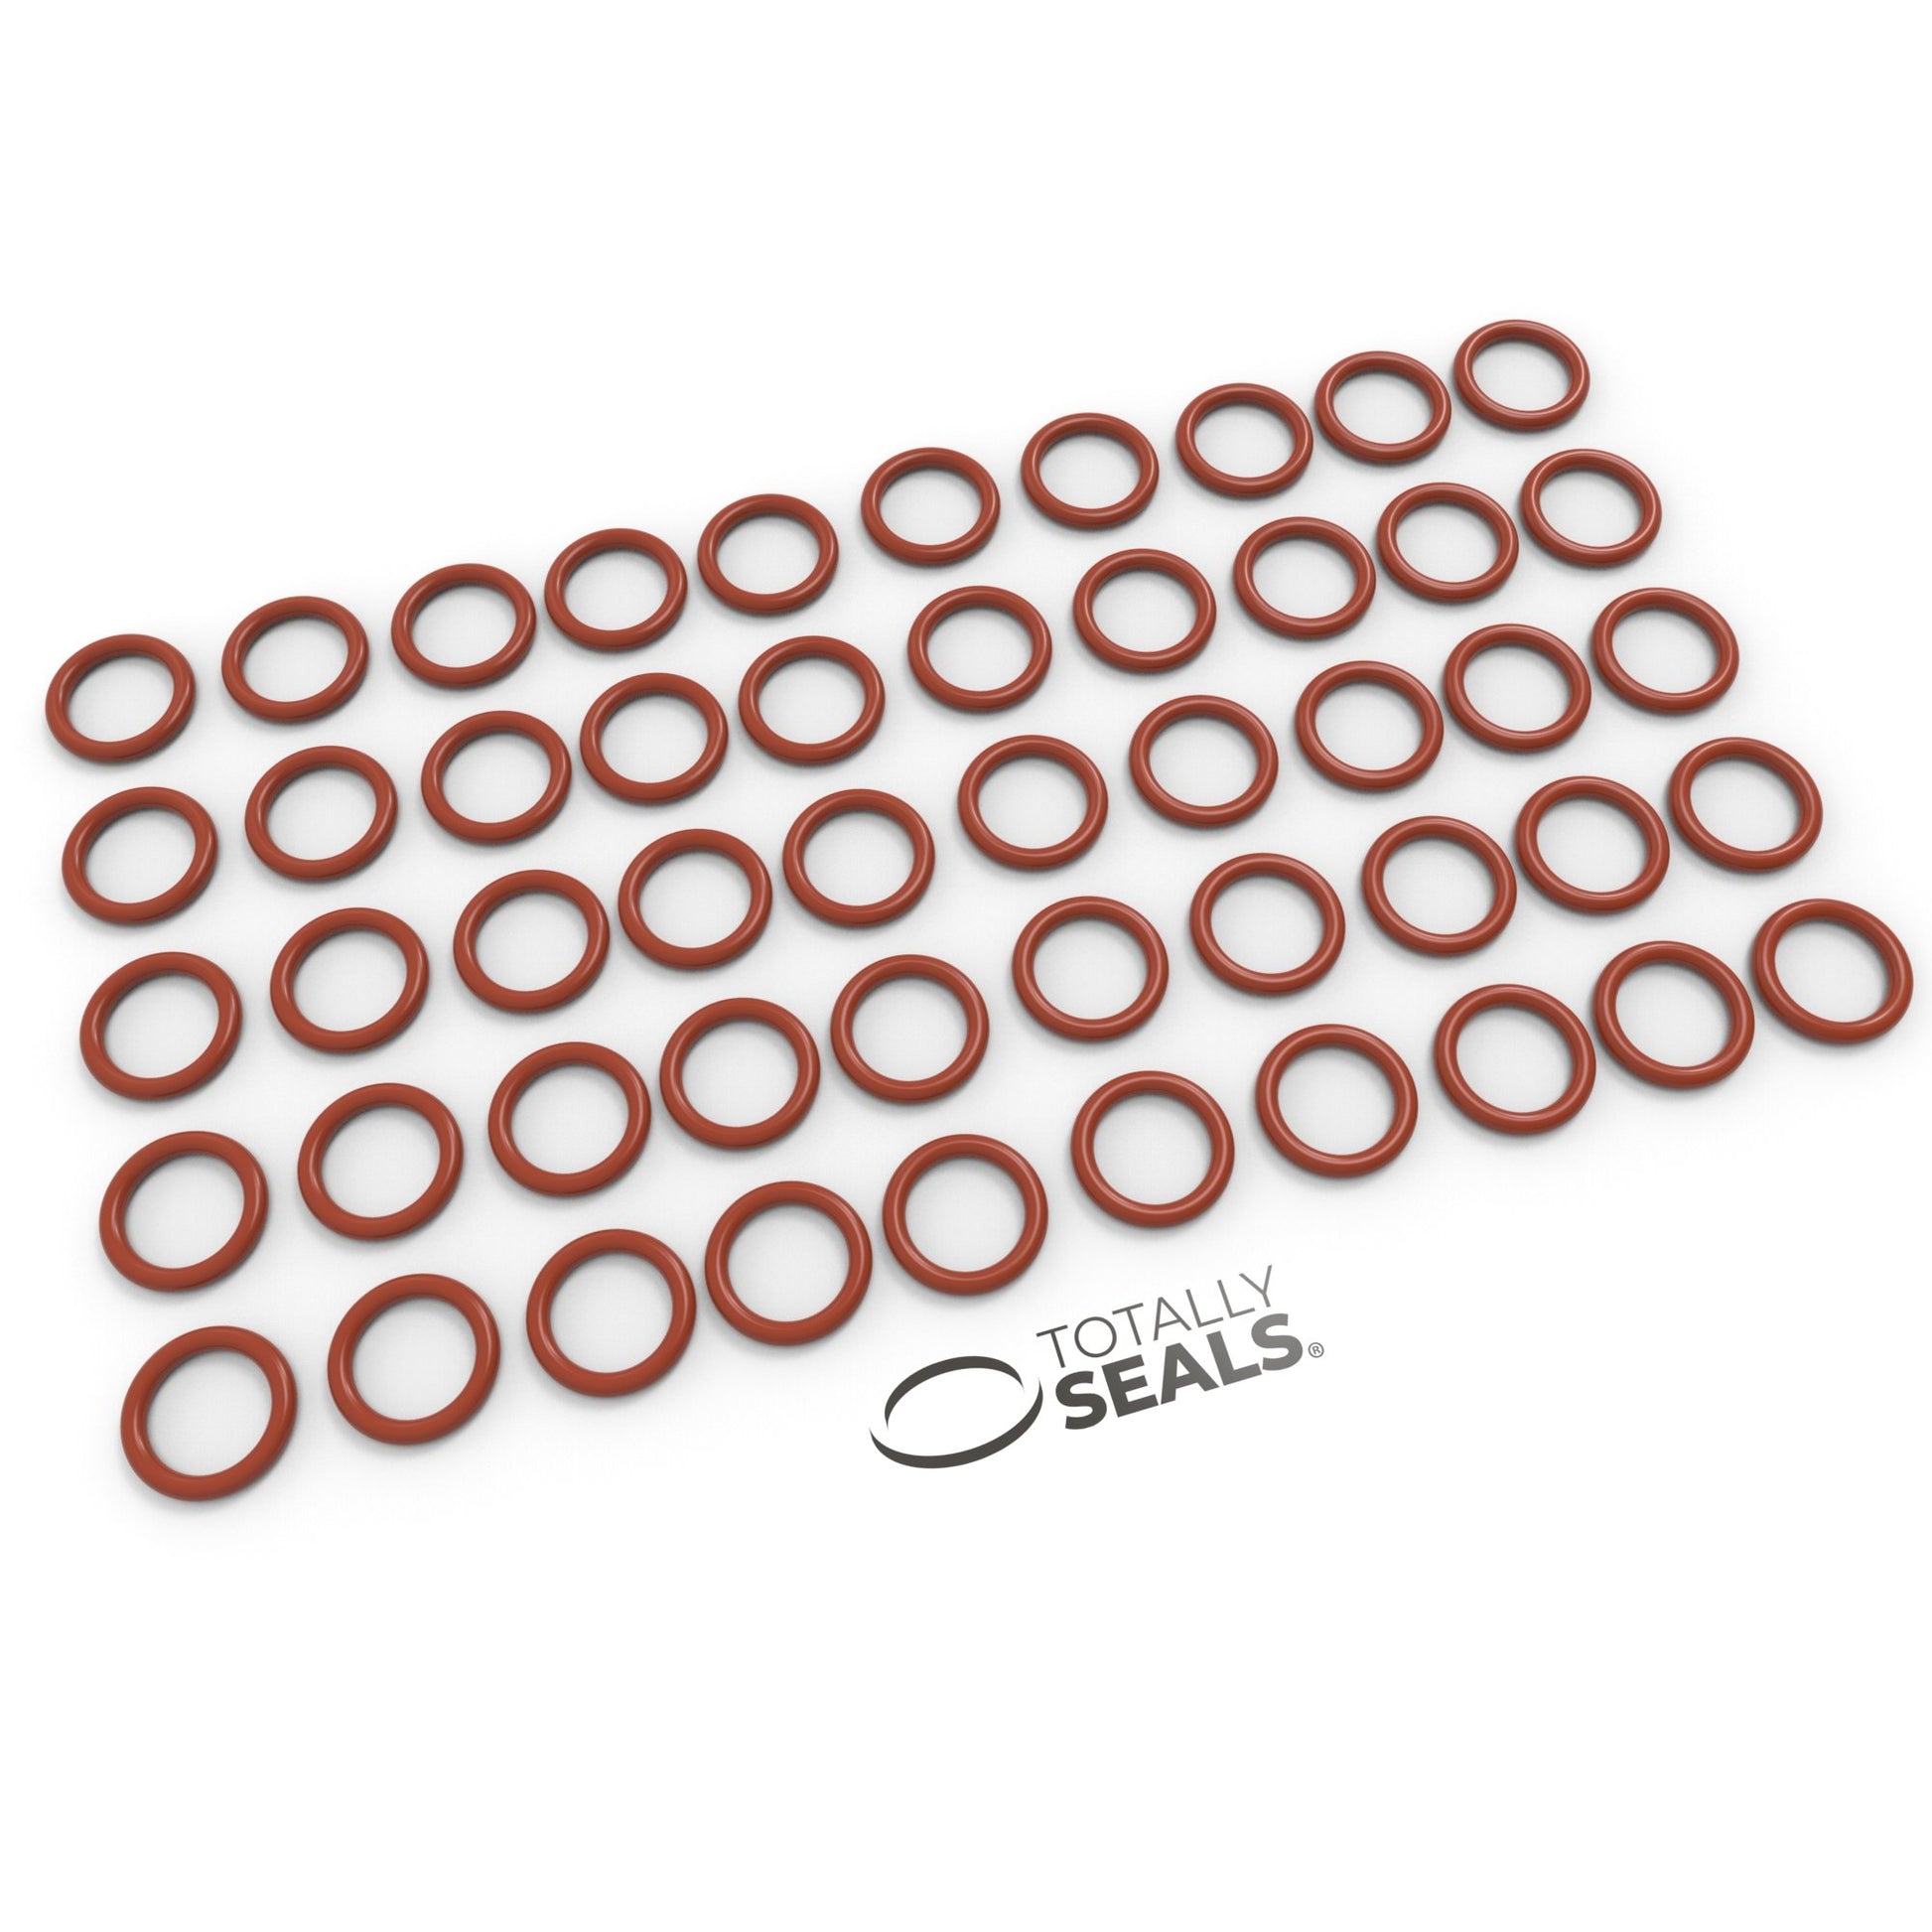 40mm x 3mm (46mm OD) Silicone O-Rings - Totally Seals®